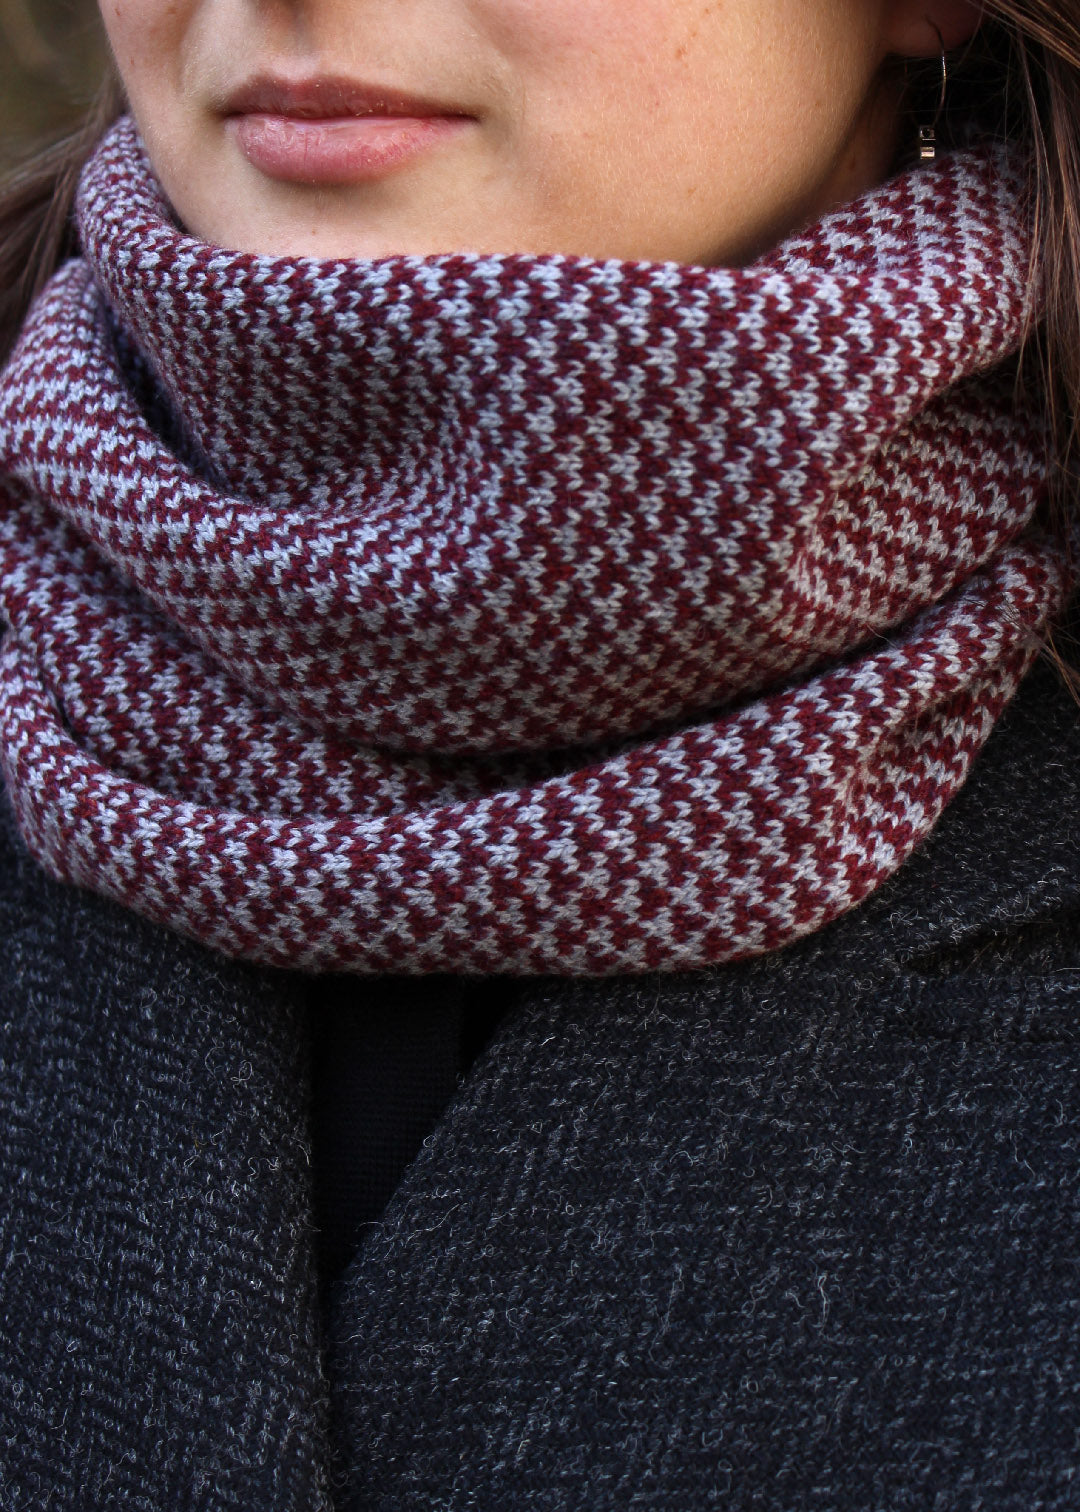 Merino lambswool neck warmer in burgundy and pale grey with a design inspired by the Hebridean sea on the crossing to the Isle of Harris.